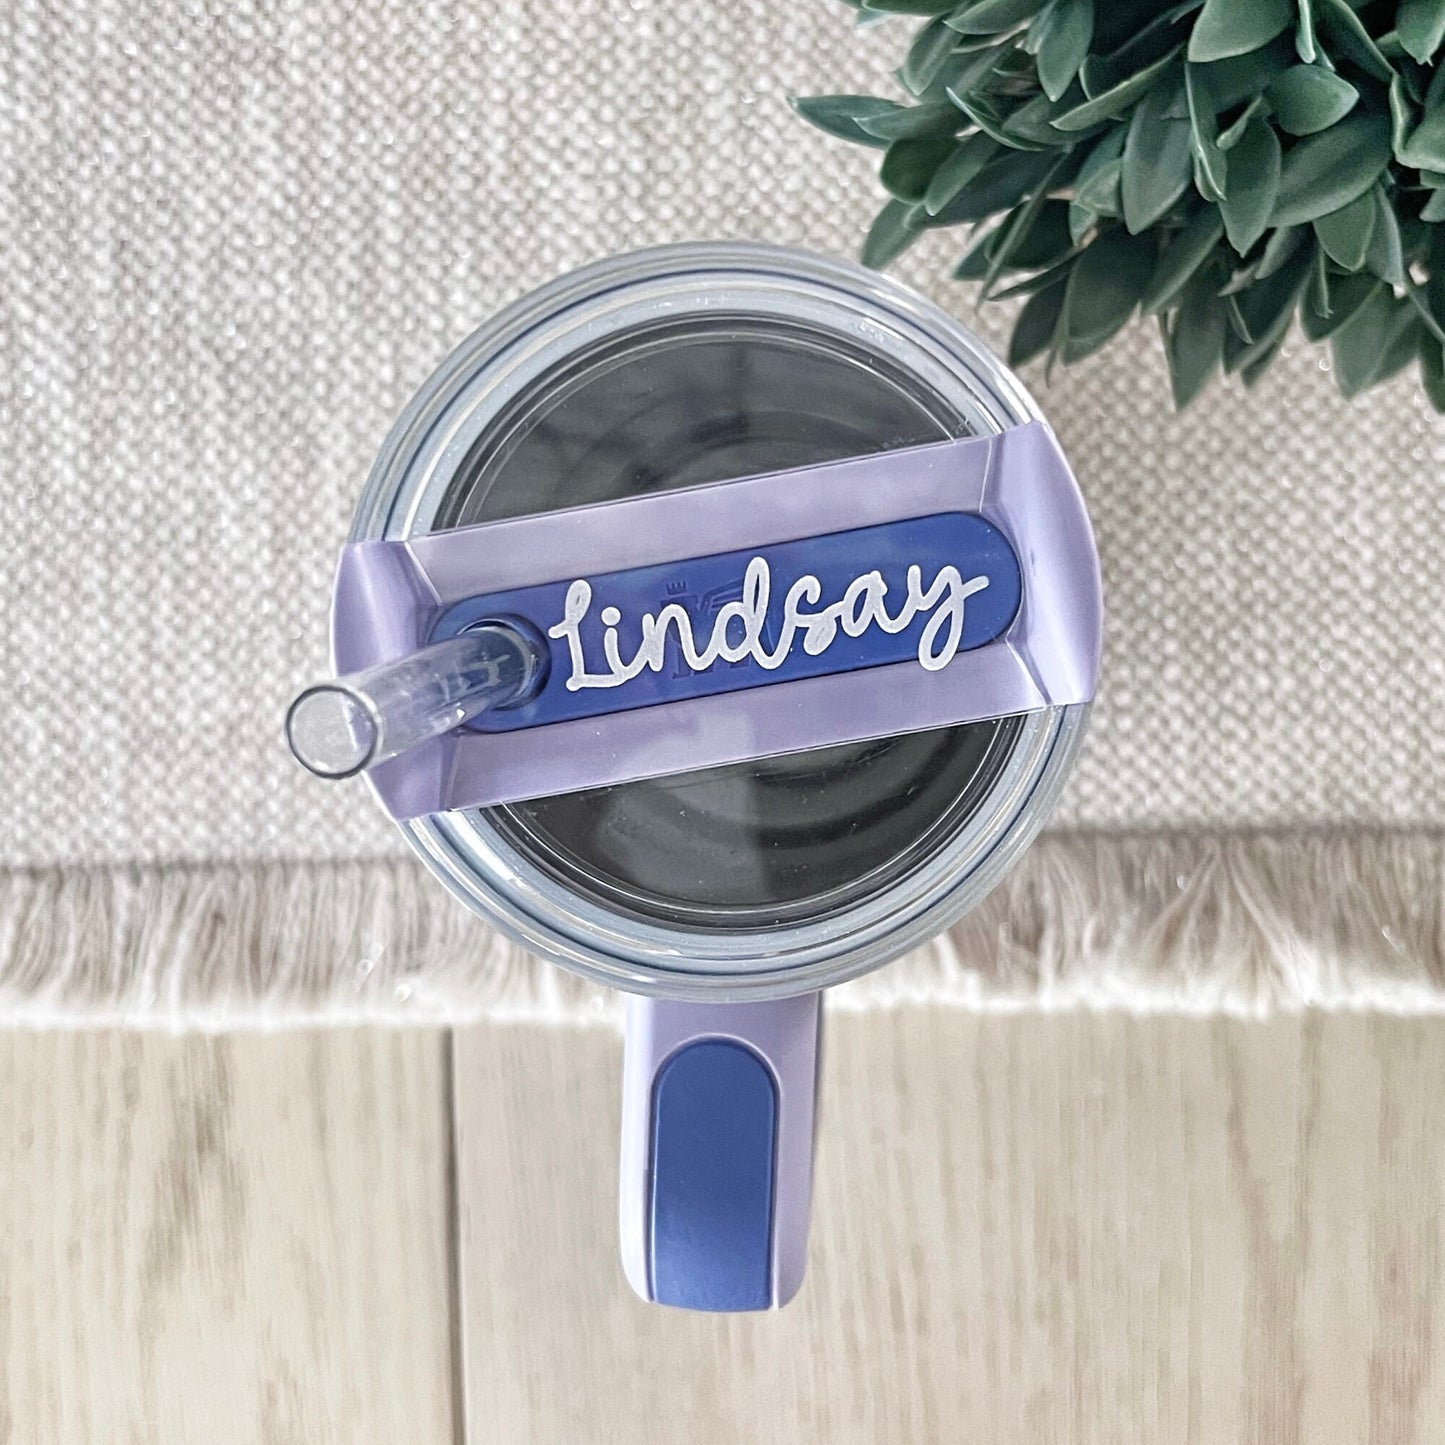 Name Plate for Tumbler Cup, Name Tag for Tumbler, Personalized Tumbler Topper